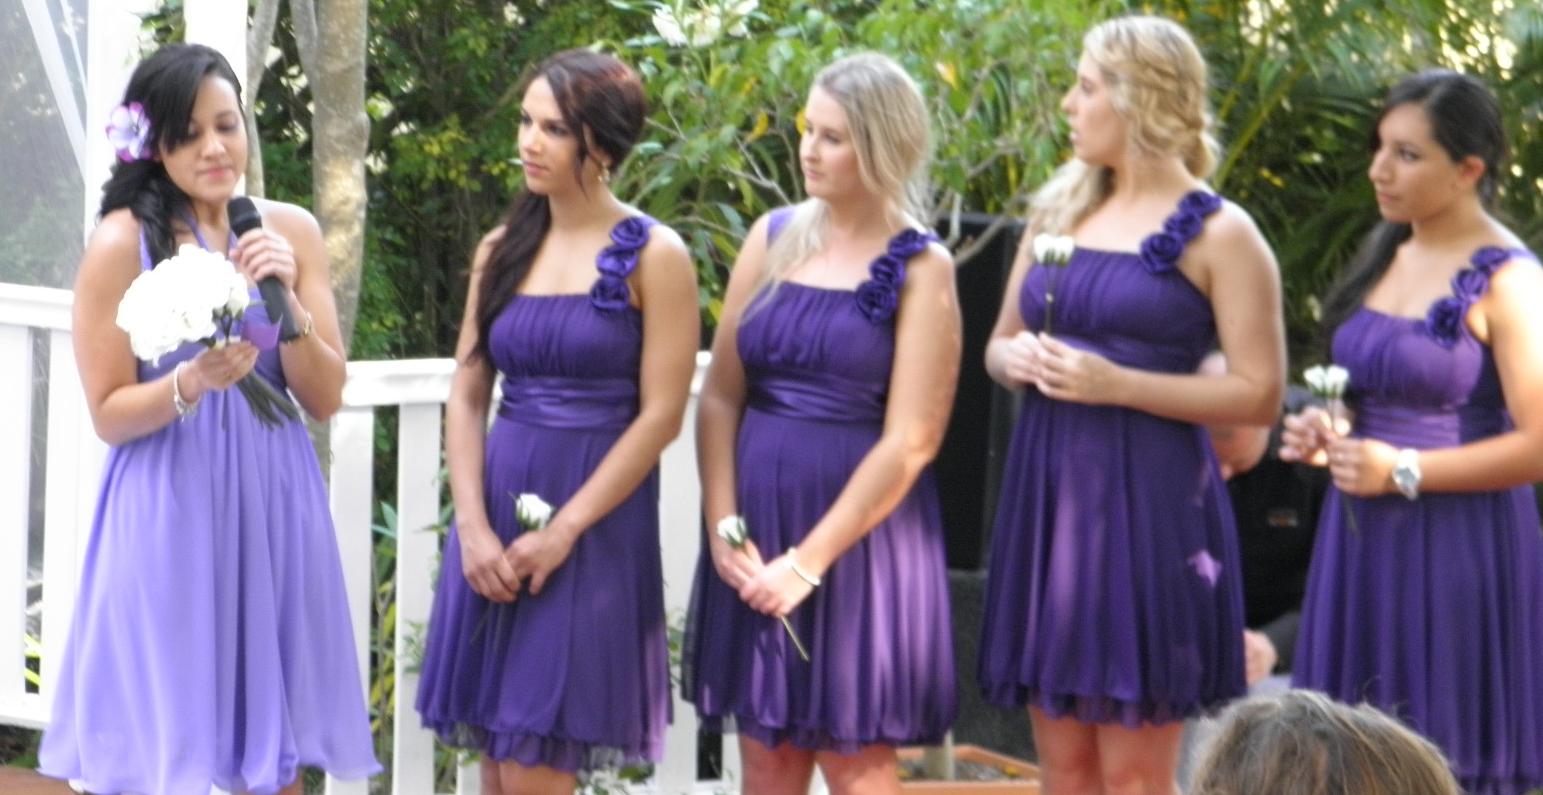 Mt Ommaney Hotel Wedding. Bridesmaids dressed in purple as the Maid of Honour performs a reading.